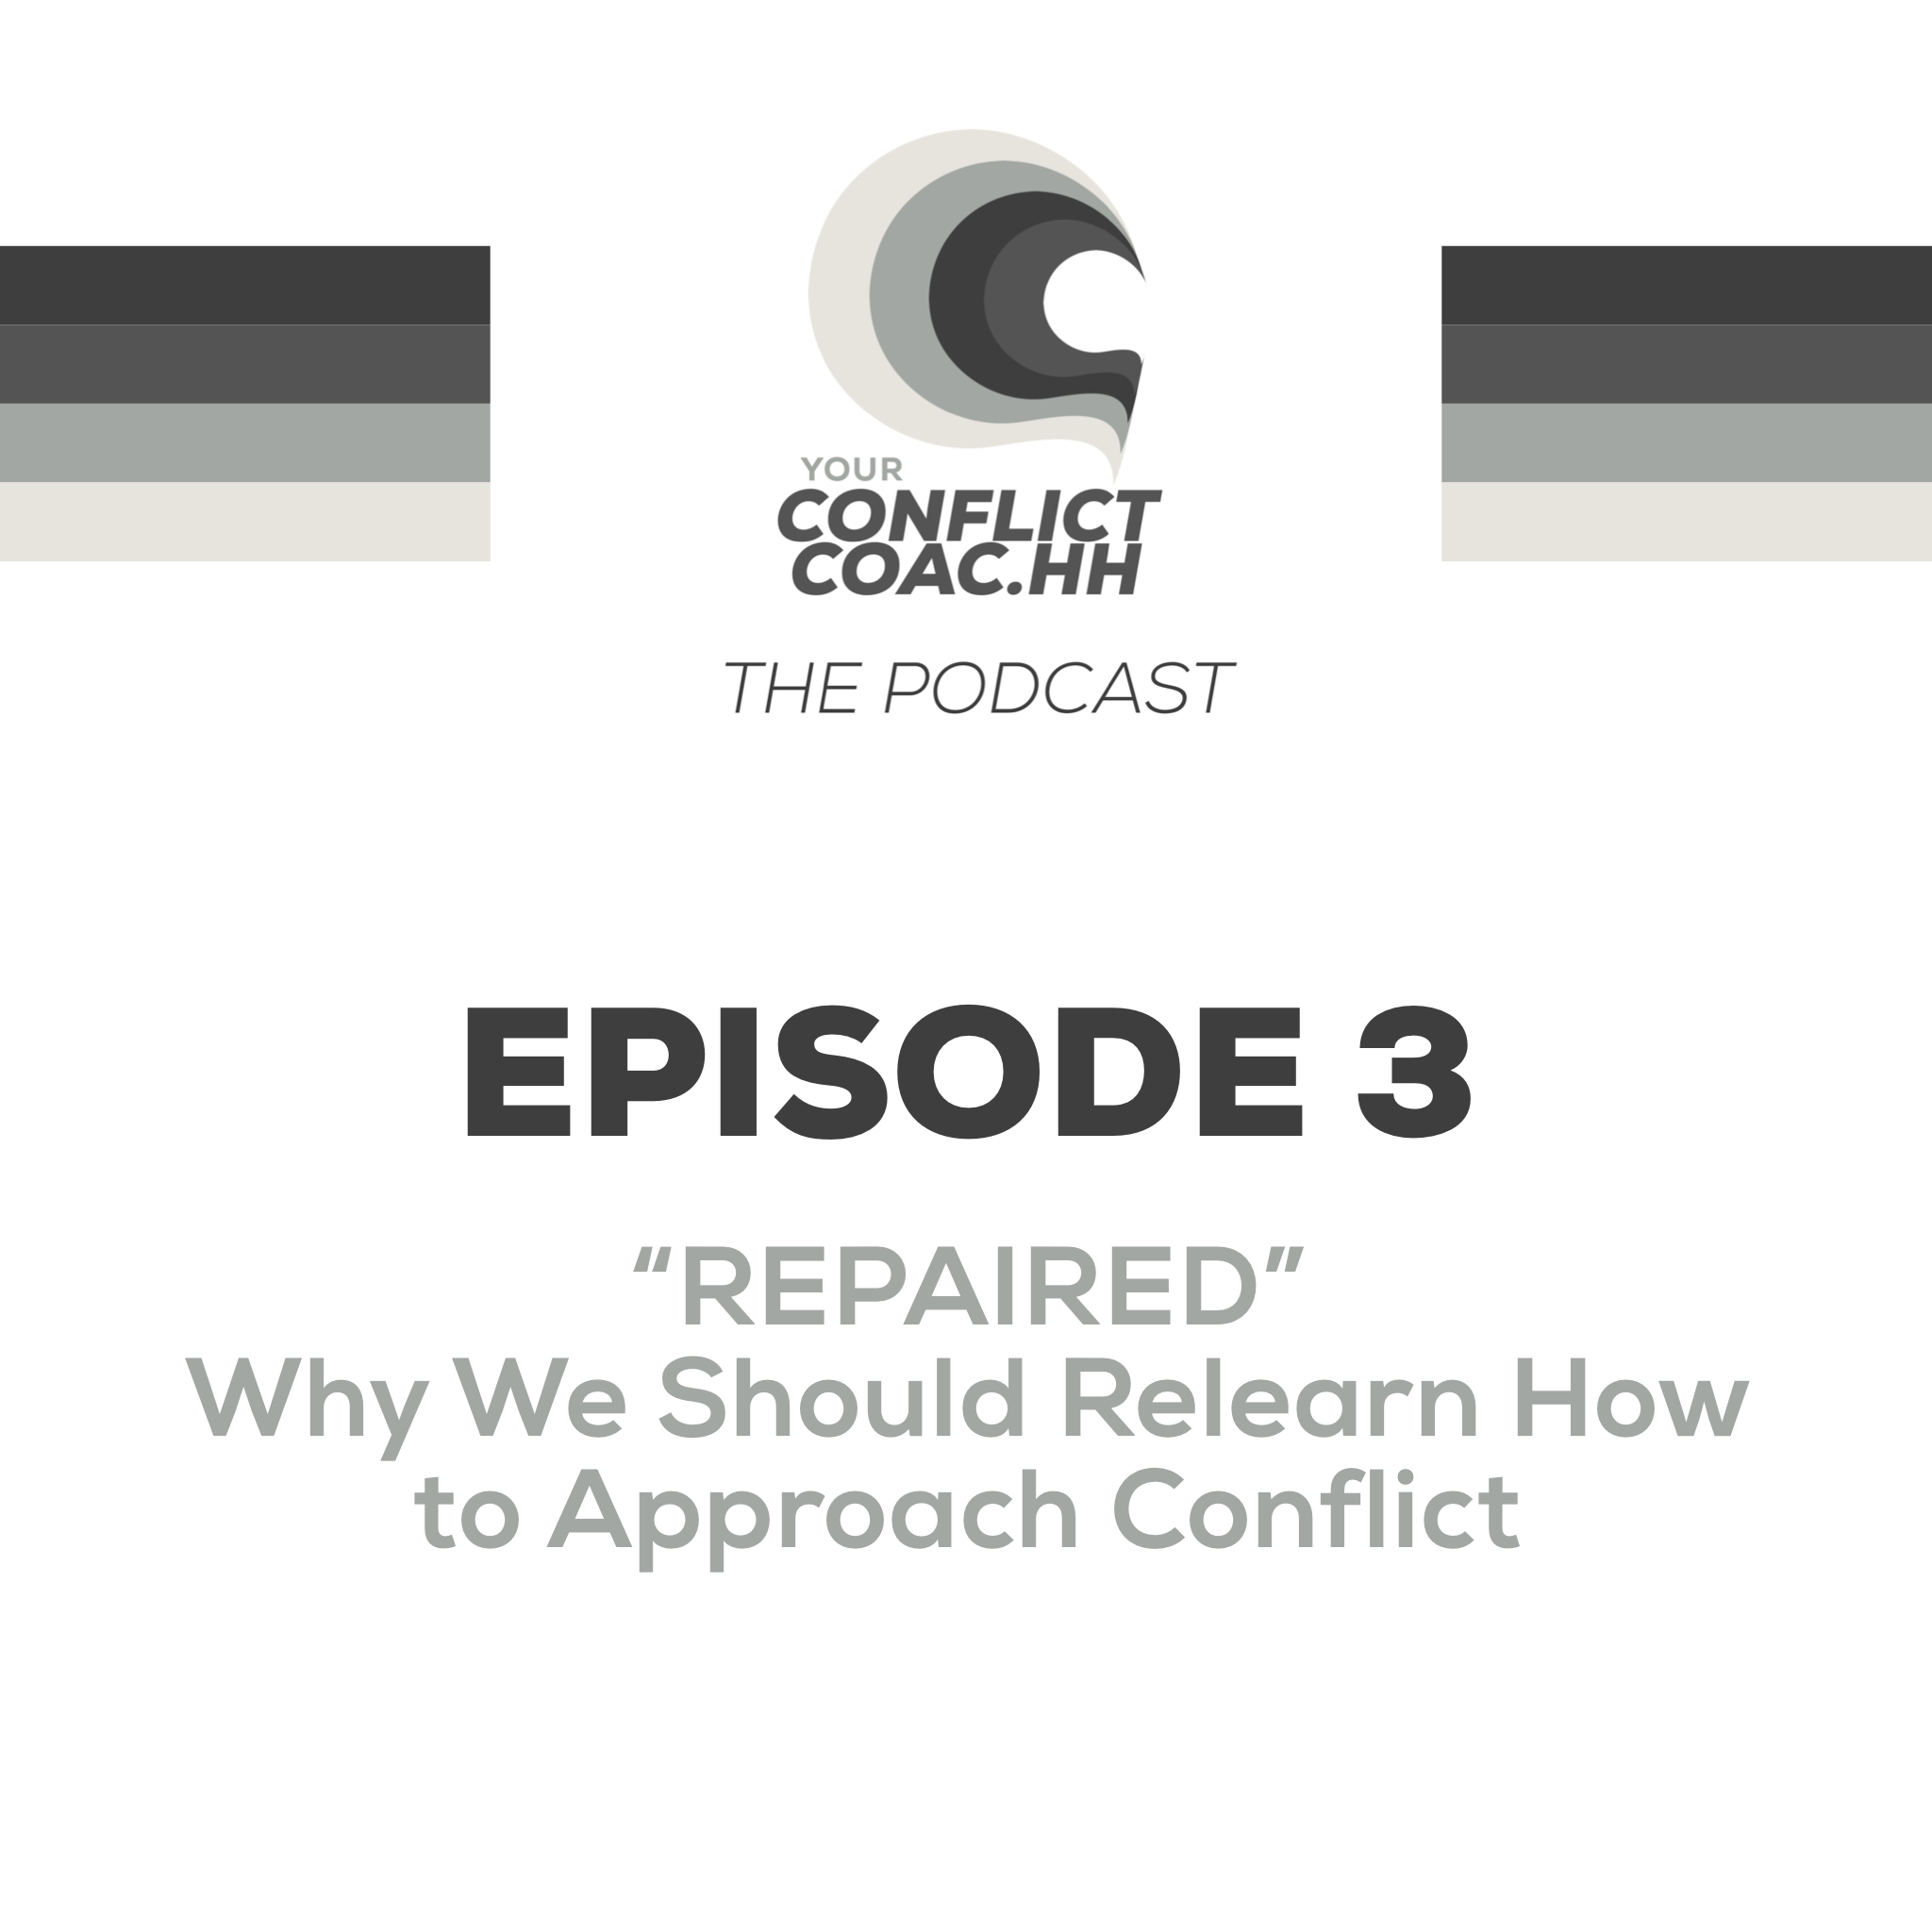 REPAIRED - Why We Should Relearn How to Approach Conflict